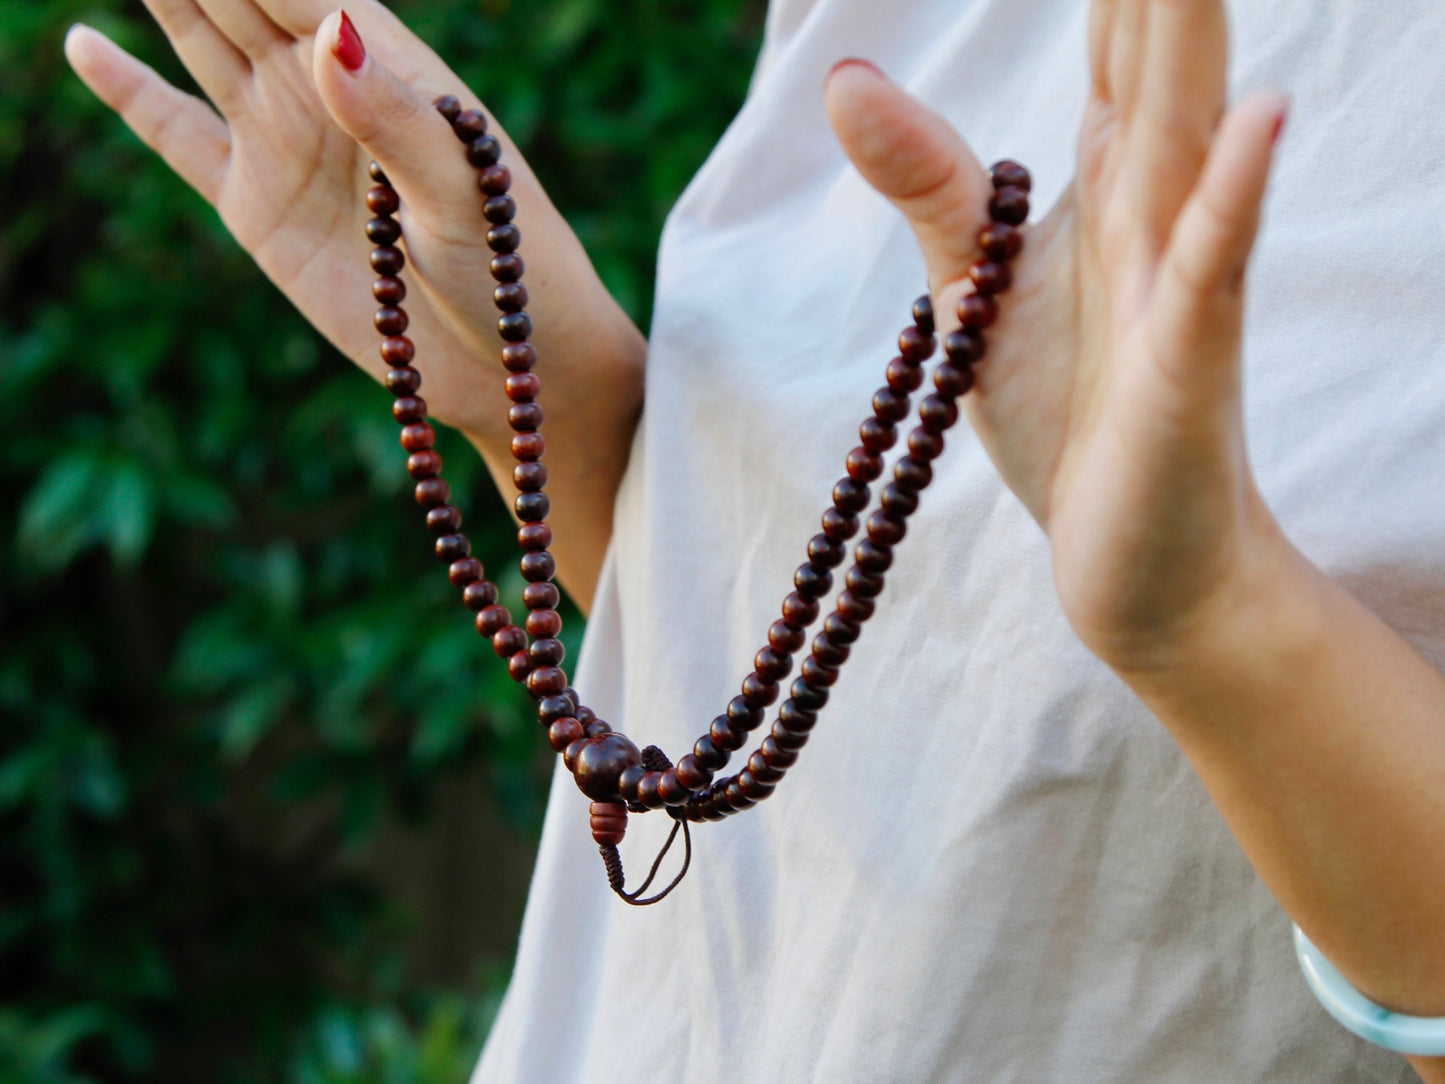 rosewood mala beads held between 2 hands showing length and shades